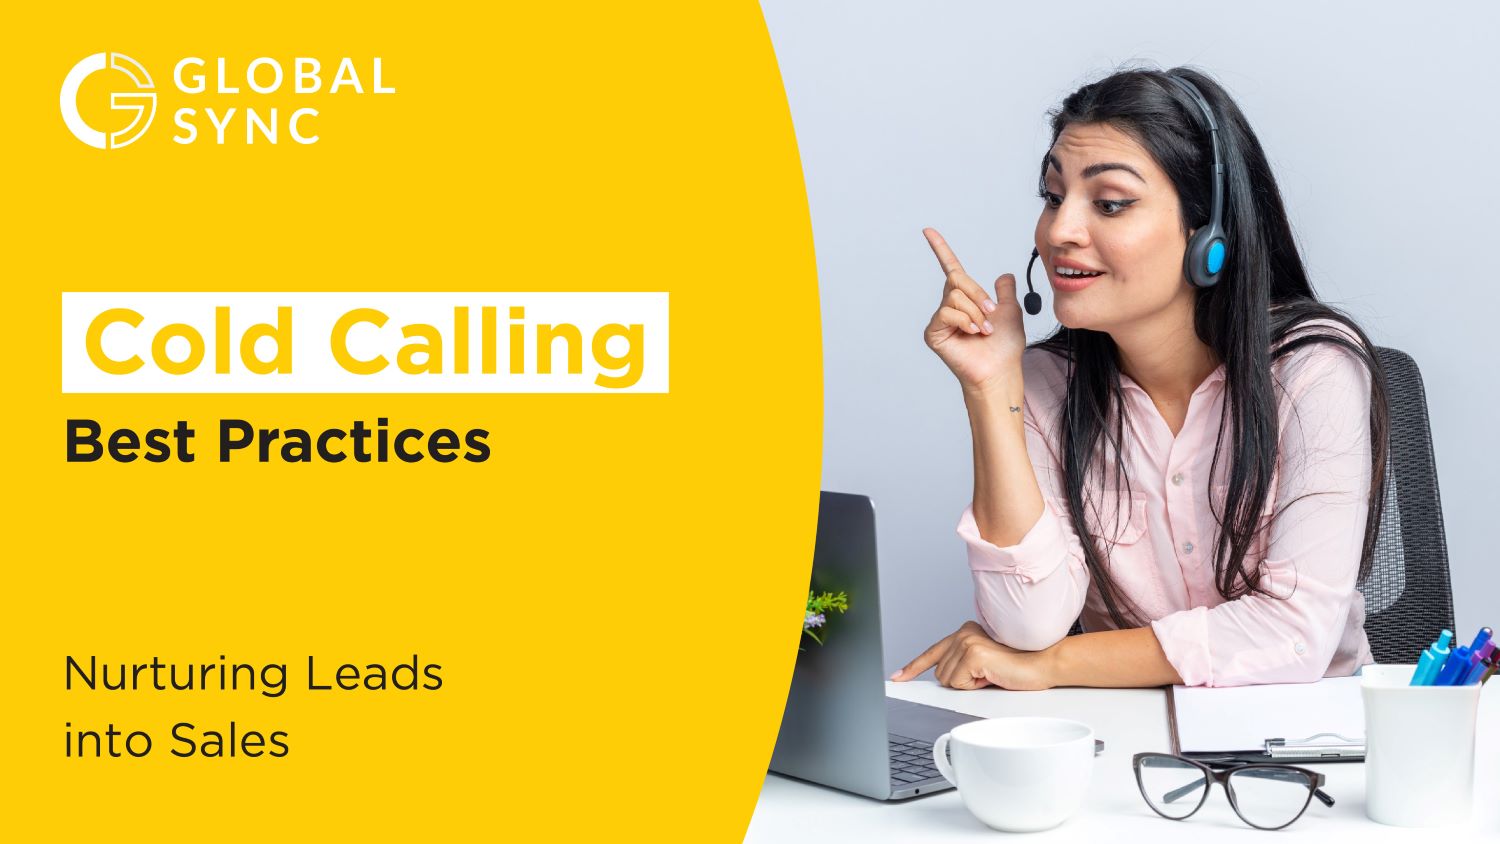 Cold Calling Best Practices: Nurturing Leads into Sales